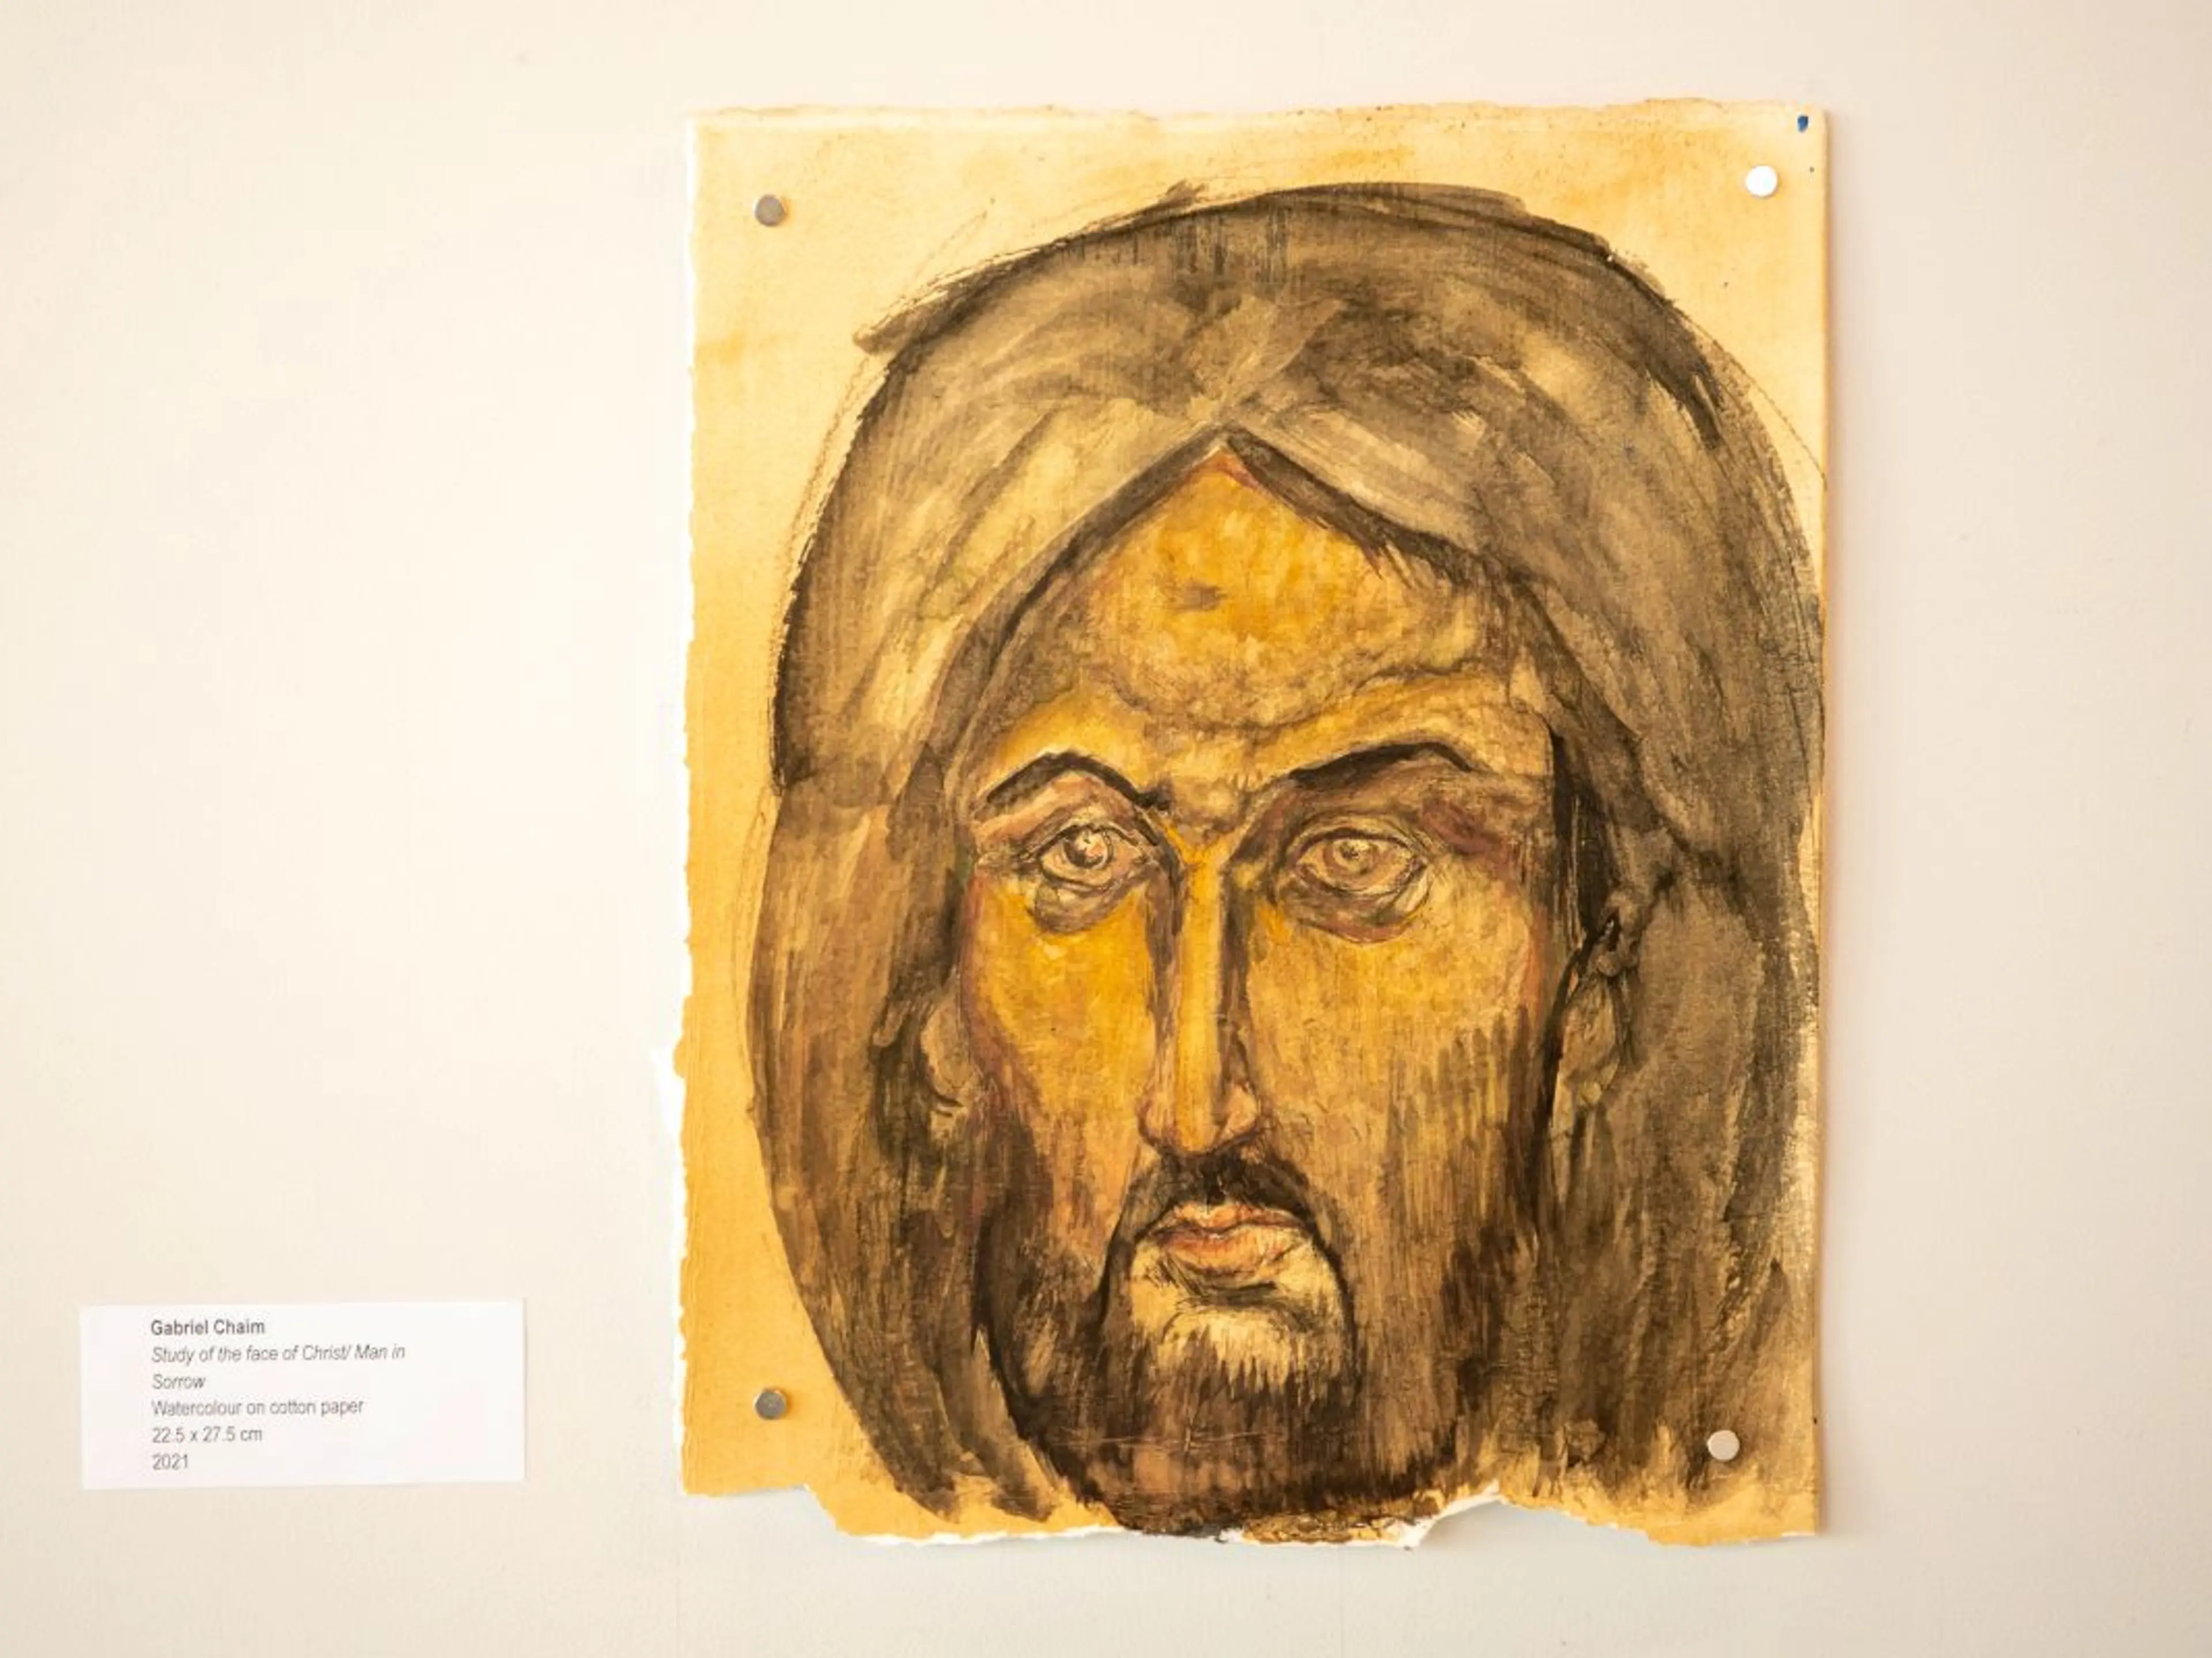 Study of the face of Christ/Man in Sorrow